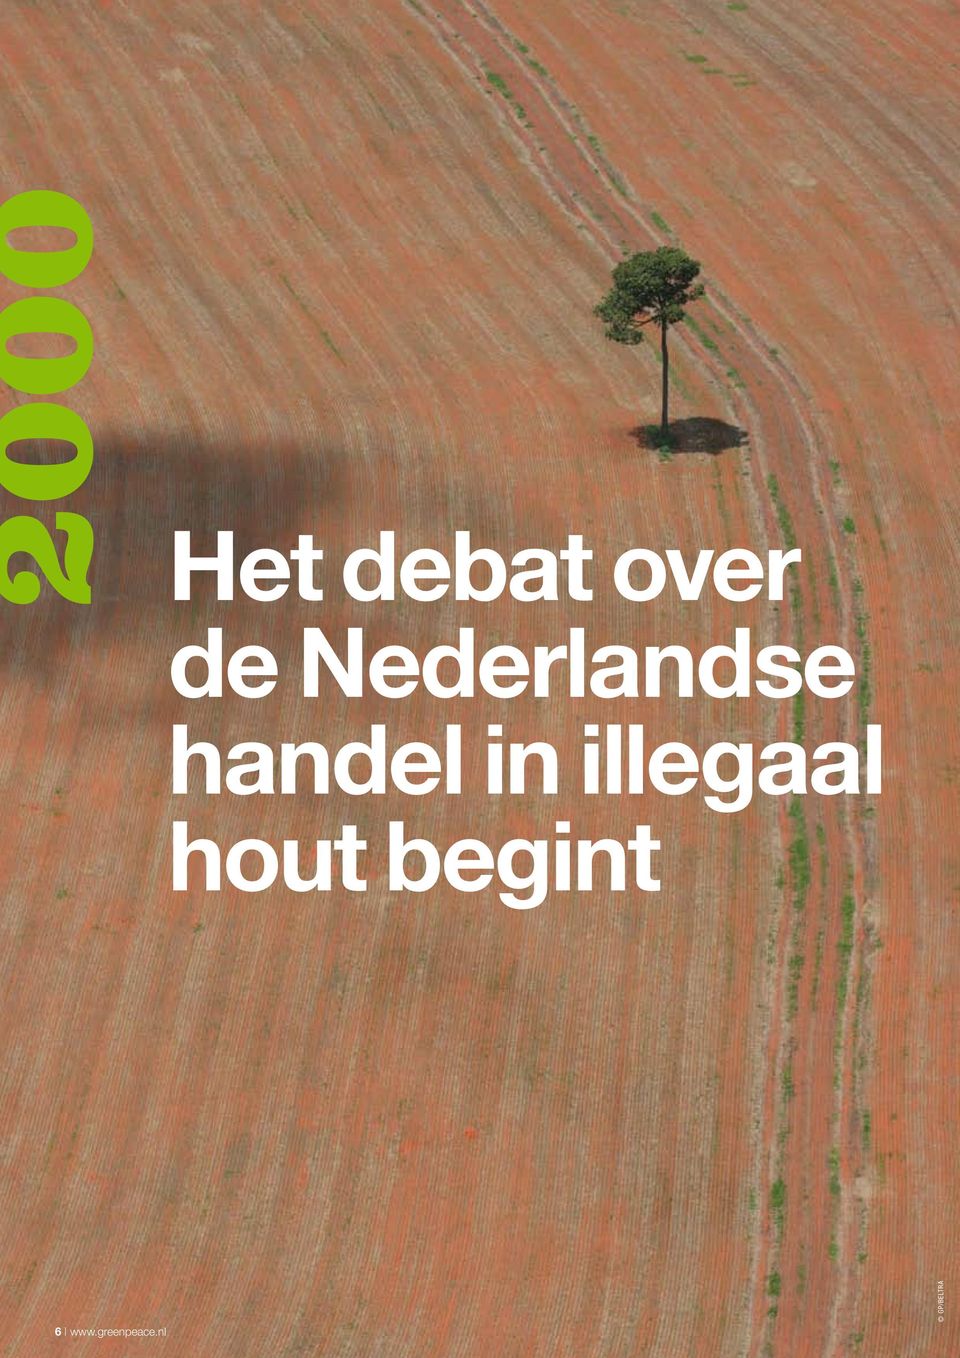 illegaal hout begint 6